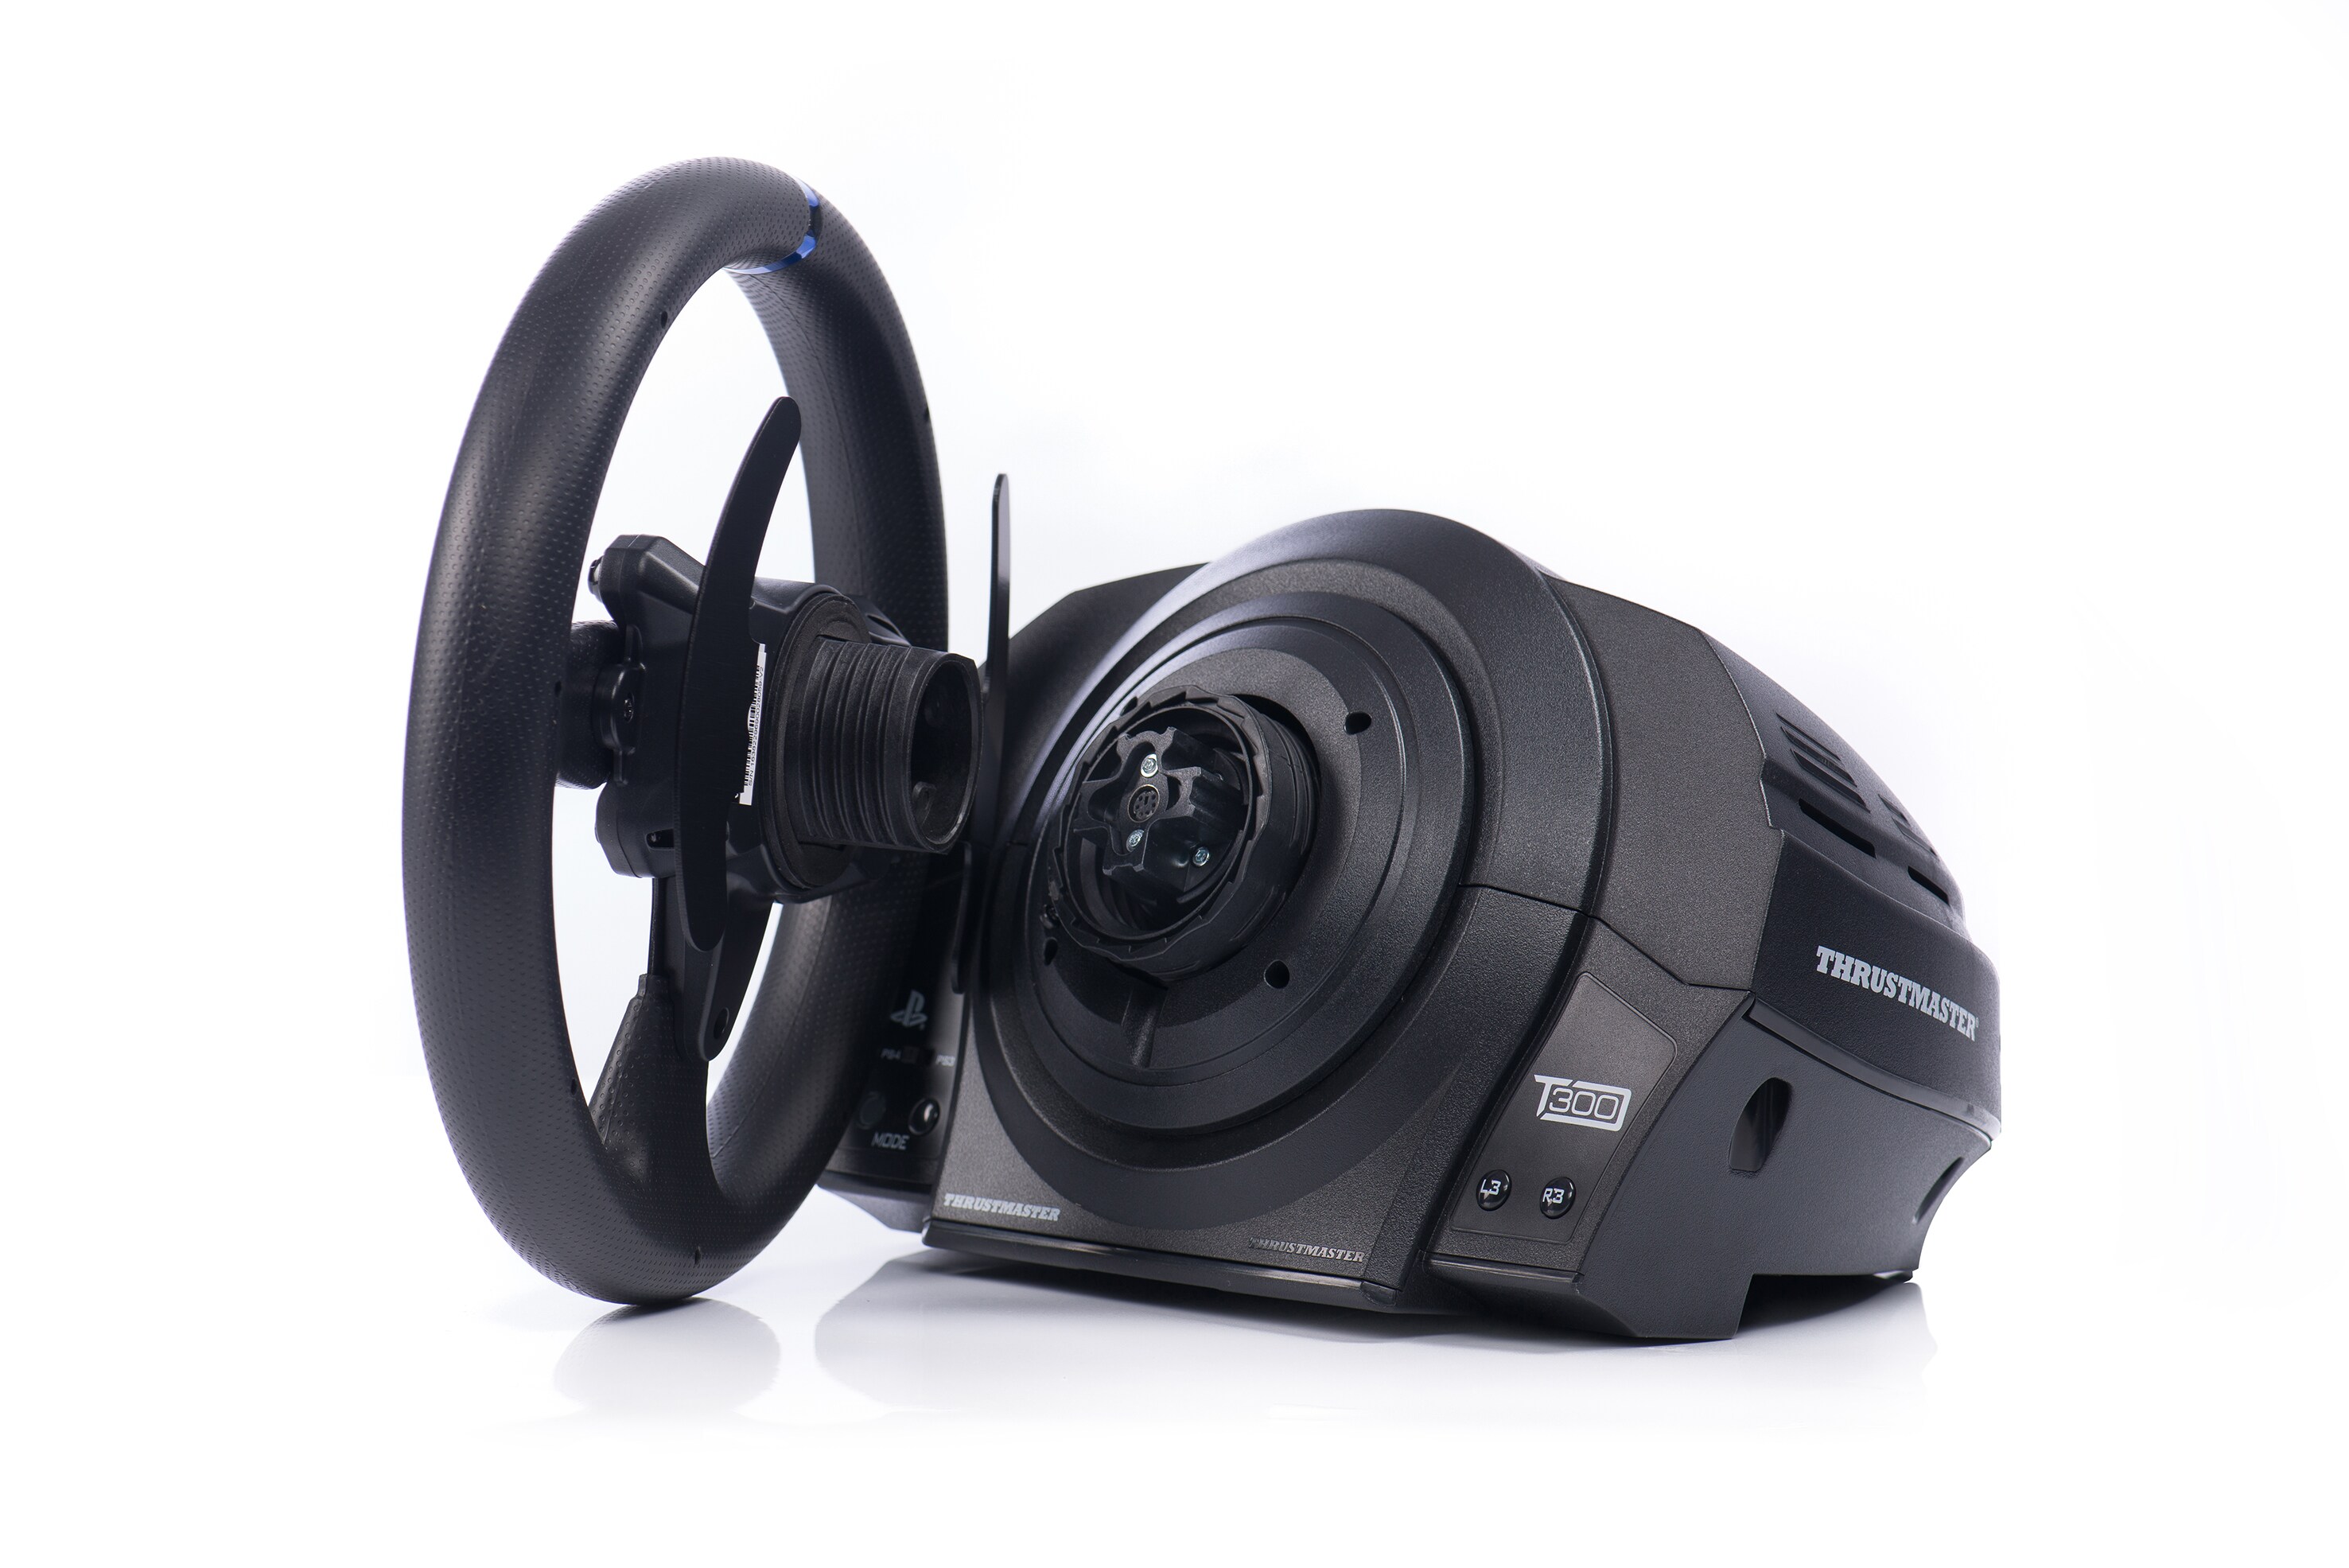 Thrustmaster T300RS GT Edition Racing Wheel PC & PS3/PS4/PS5 ++